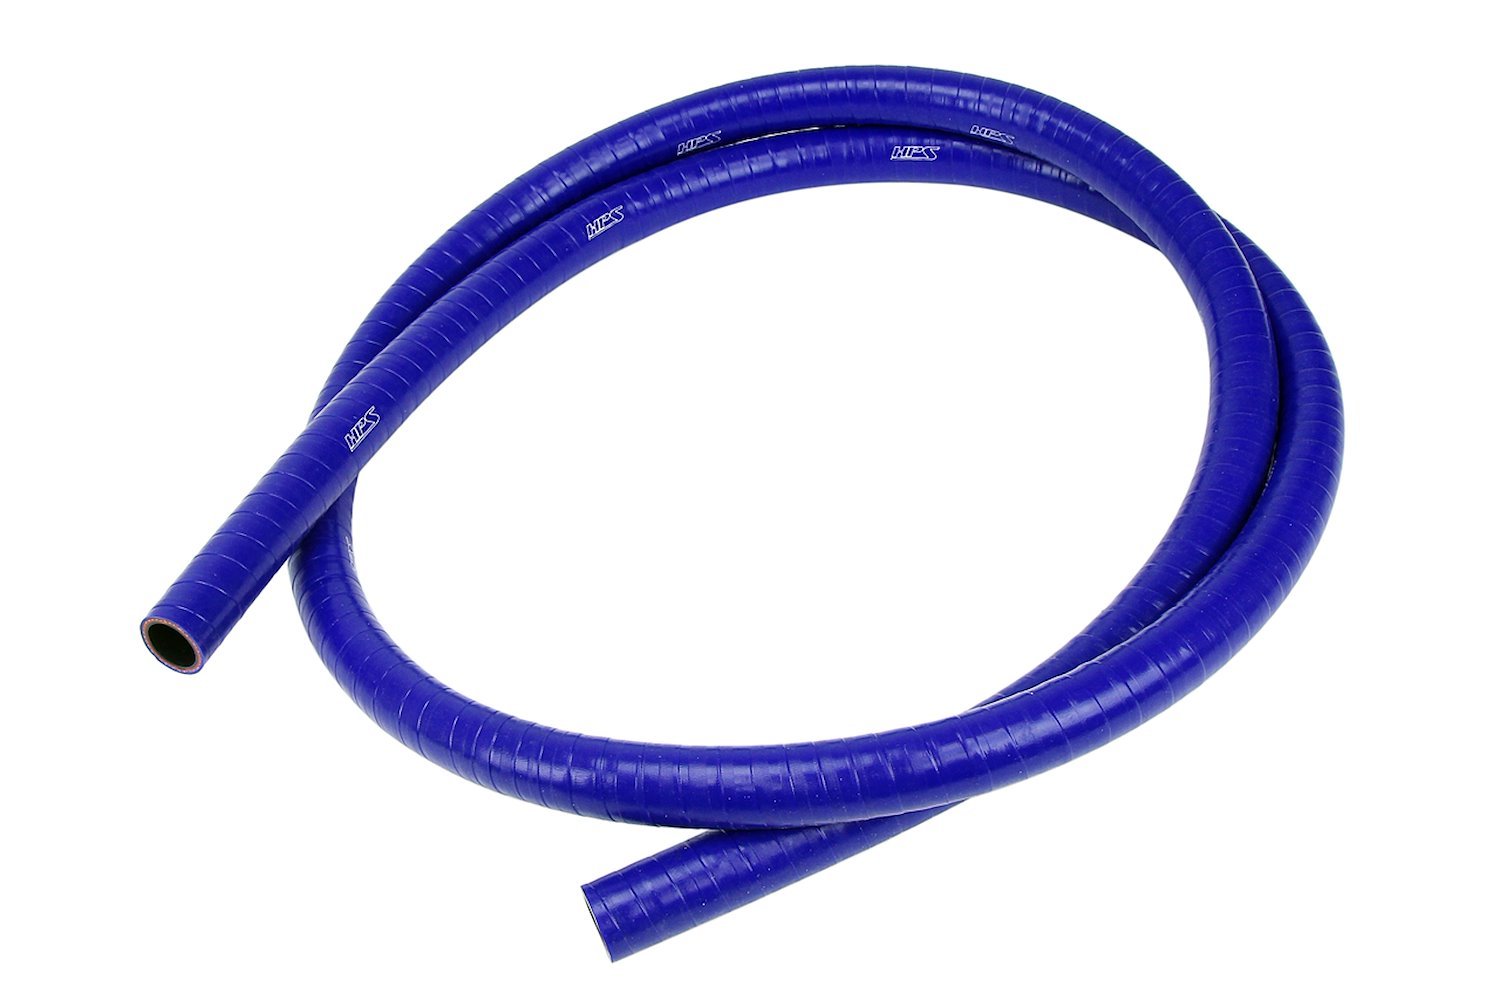 FKM-087-BLUE FKM Silicone Hose, Silicone FKM Lined Oil Resistant Hose, High-Temp 1-Ply Reinforced, 7/8 in. ID, Blue